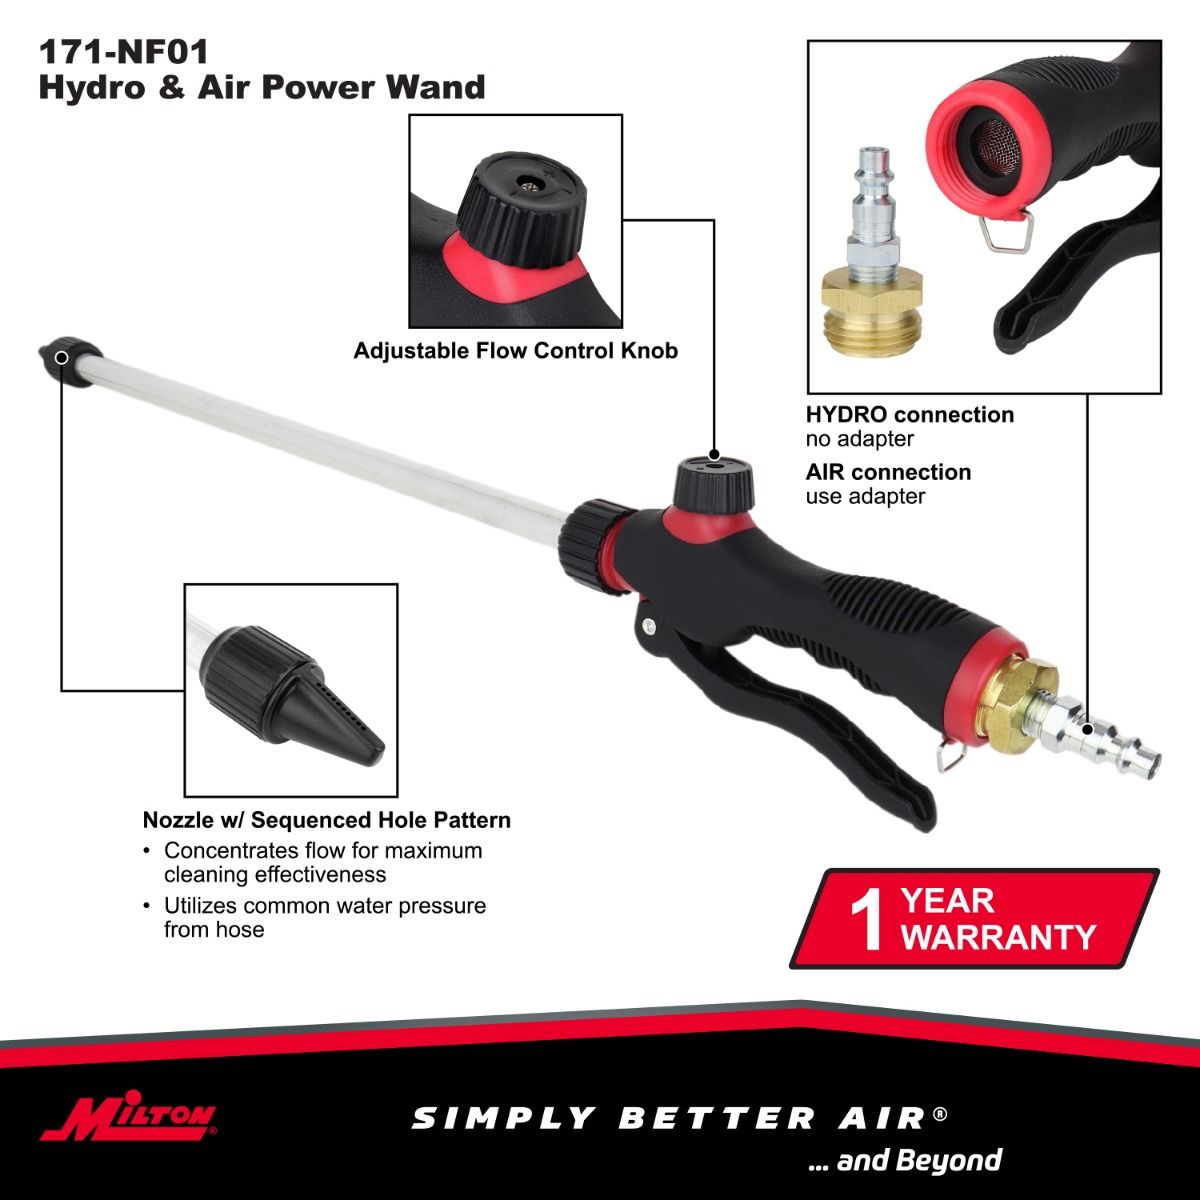 Milton Water & Air Industrial Power Wand, Dual Cleaning Power, 125 PSI & 2.8 GPM, Small & Large Heavy Equipment, Ergonomic Handle Grip, High